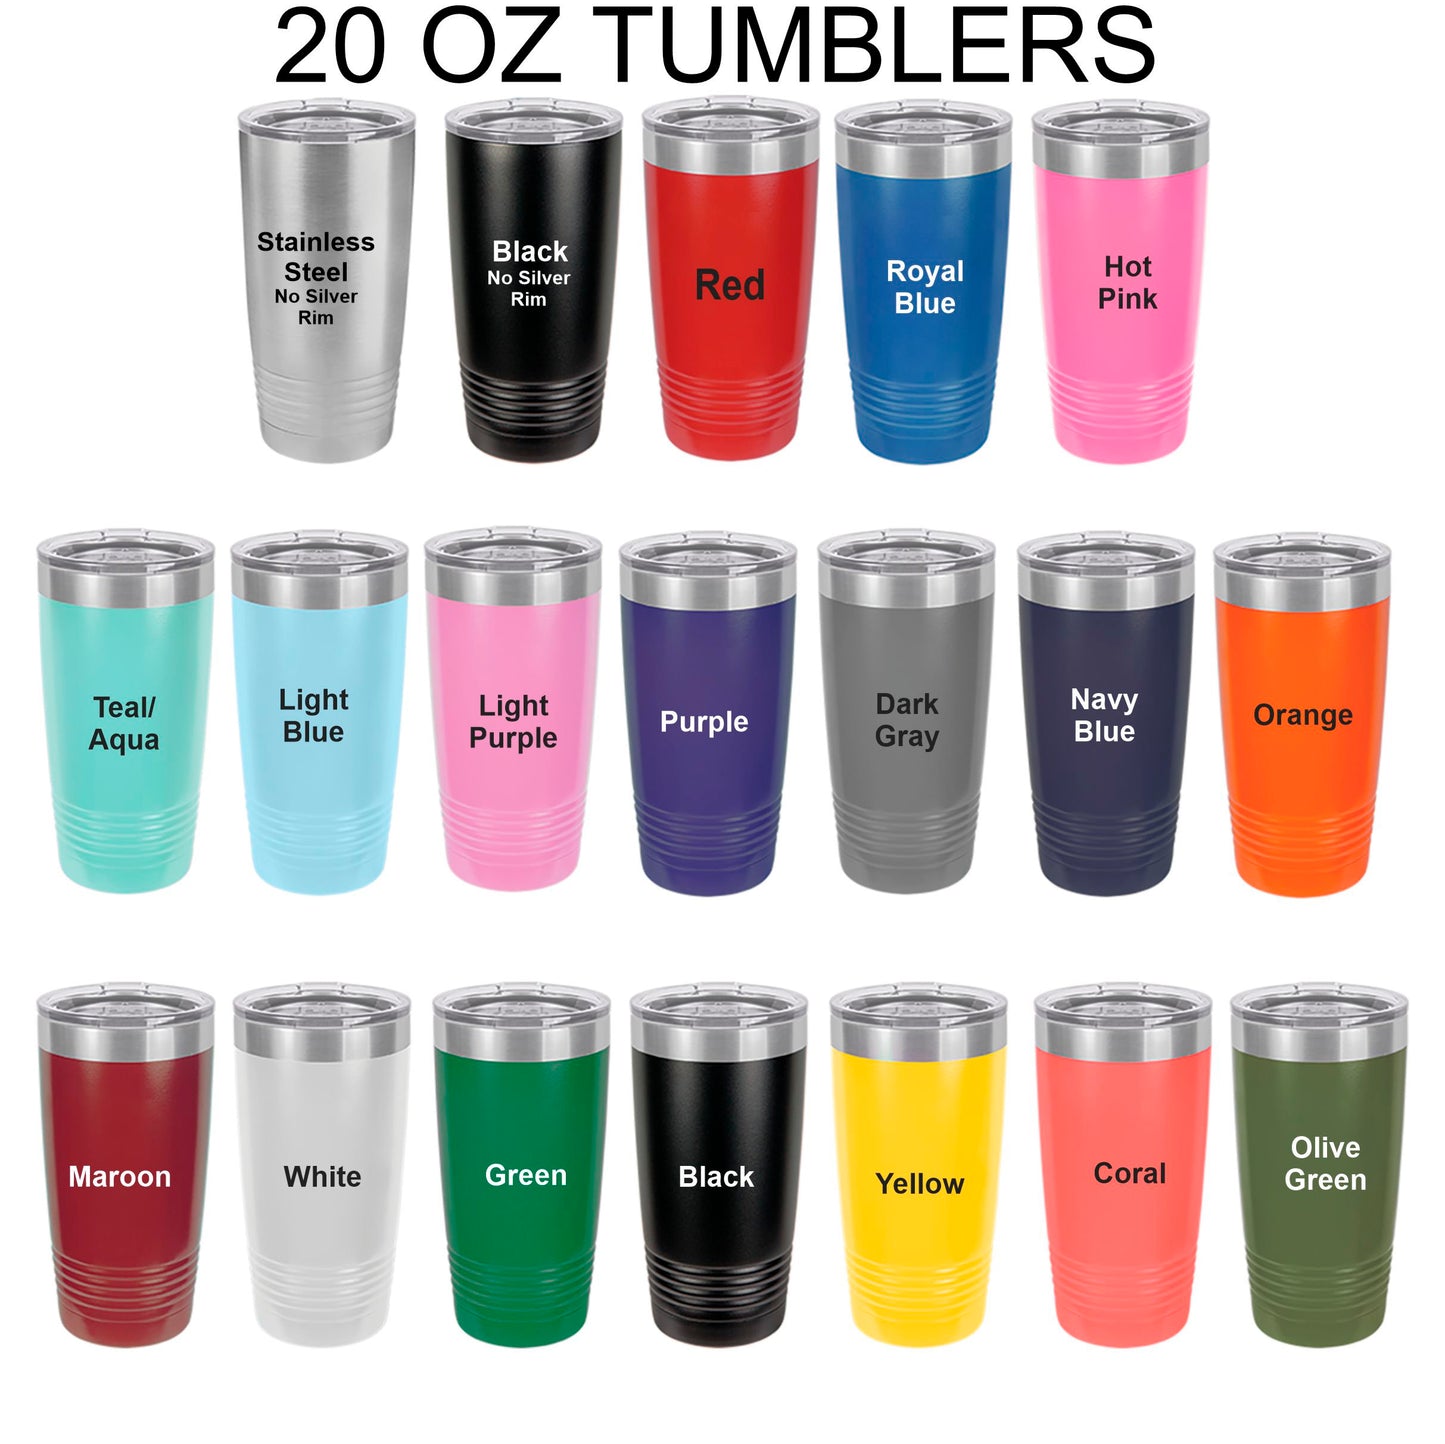 Eat Sleep Take Kids To Sports Repeat/ Sports Mom Tumbler/ Funny Sports Tumbler/ Sports Gift/ Double Sided Engraved Design/ 2 Sizes available